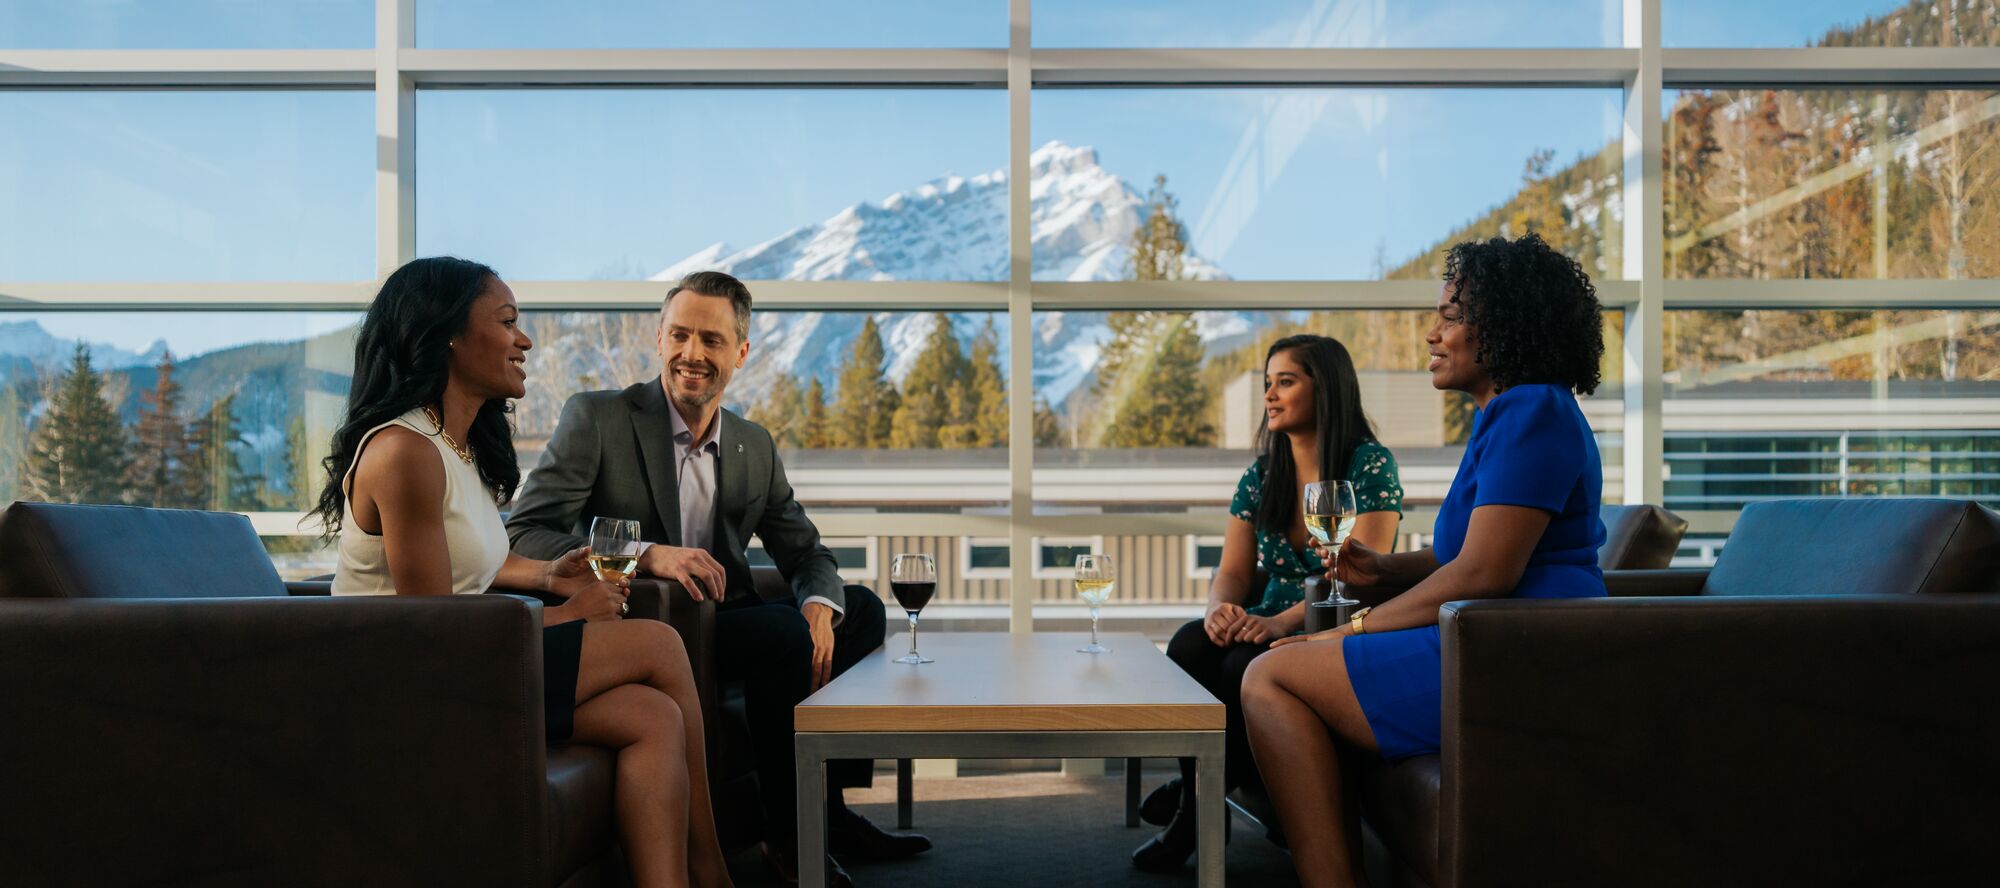 Four people sit in leather chairs at the Banff Centre with mountains in the background while enjoying a glass of wine during an event in Banff National Park.